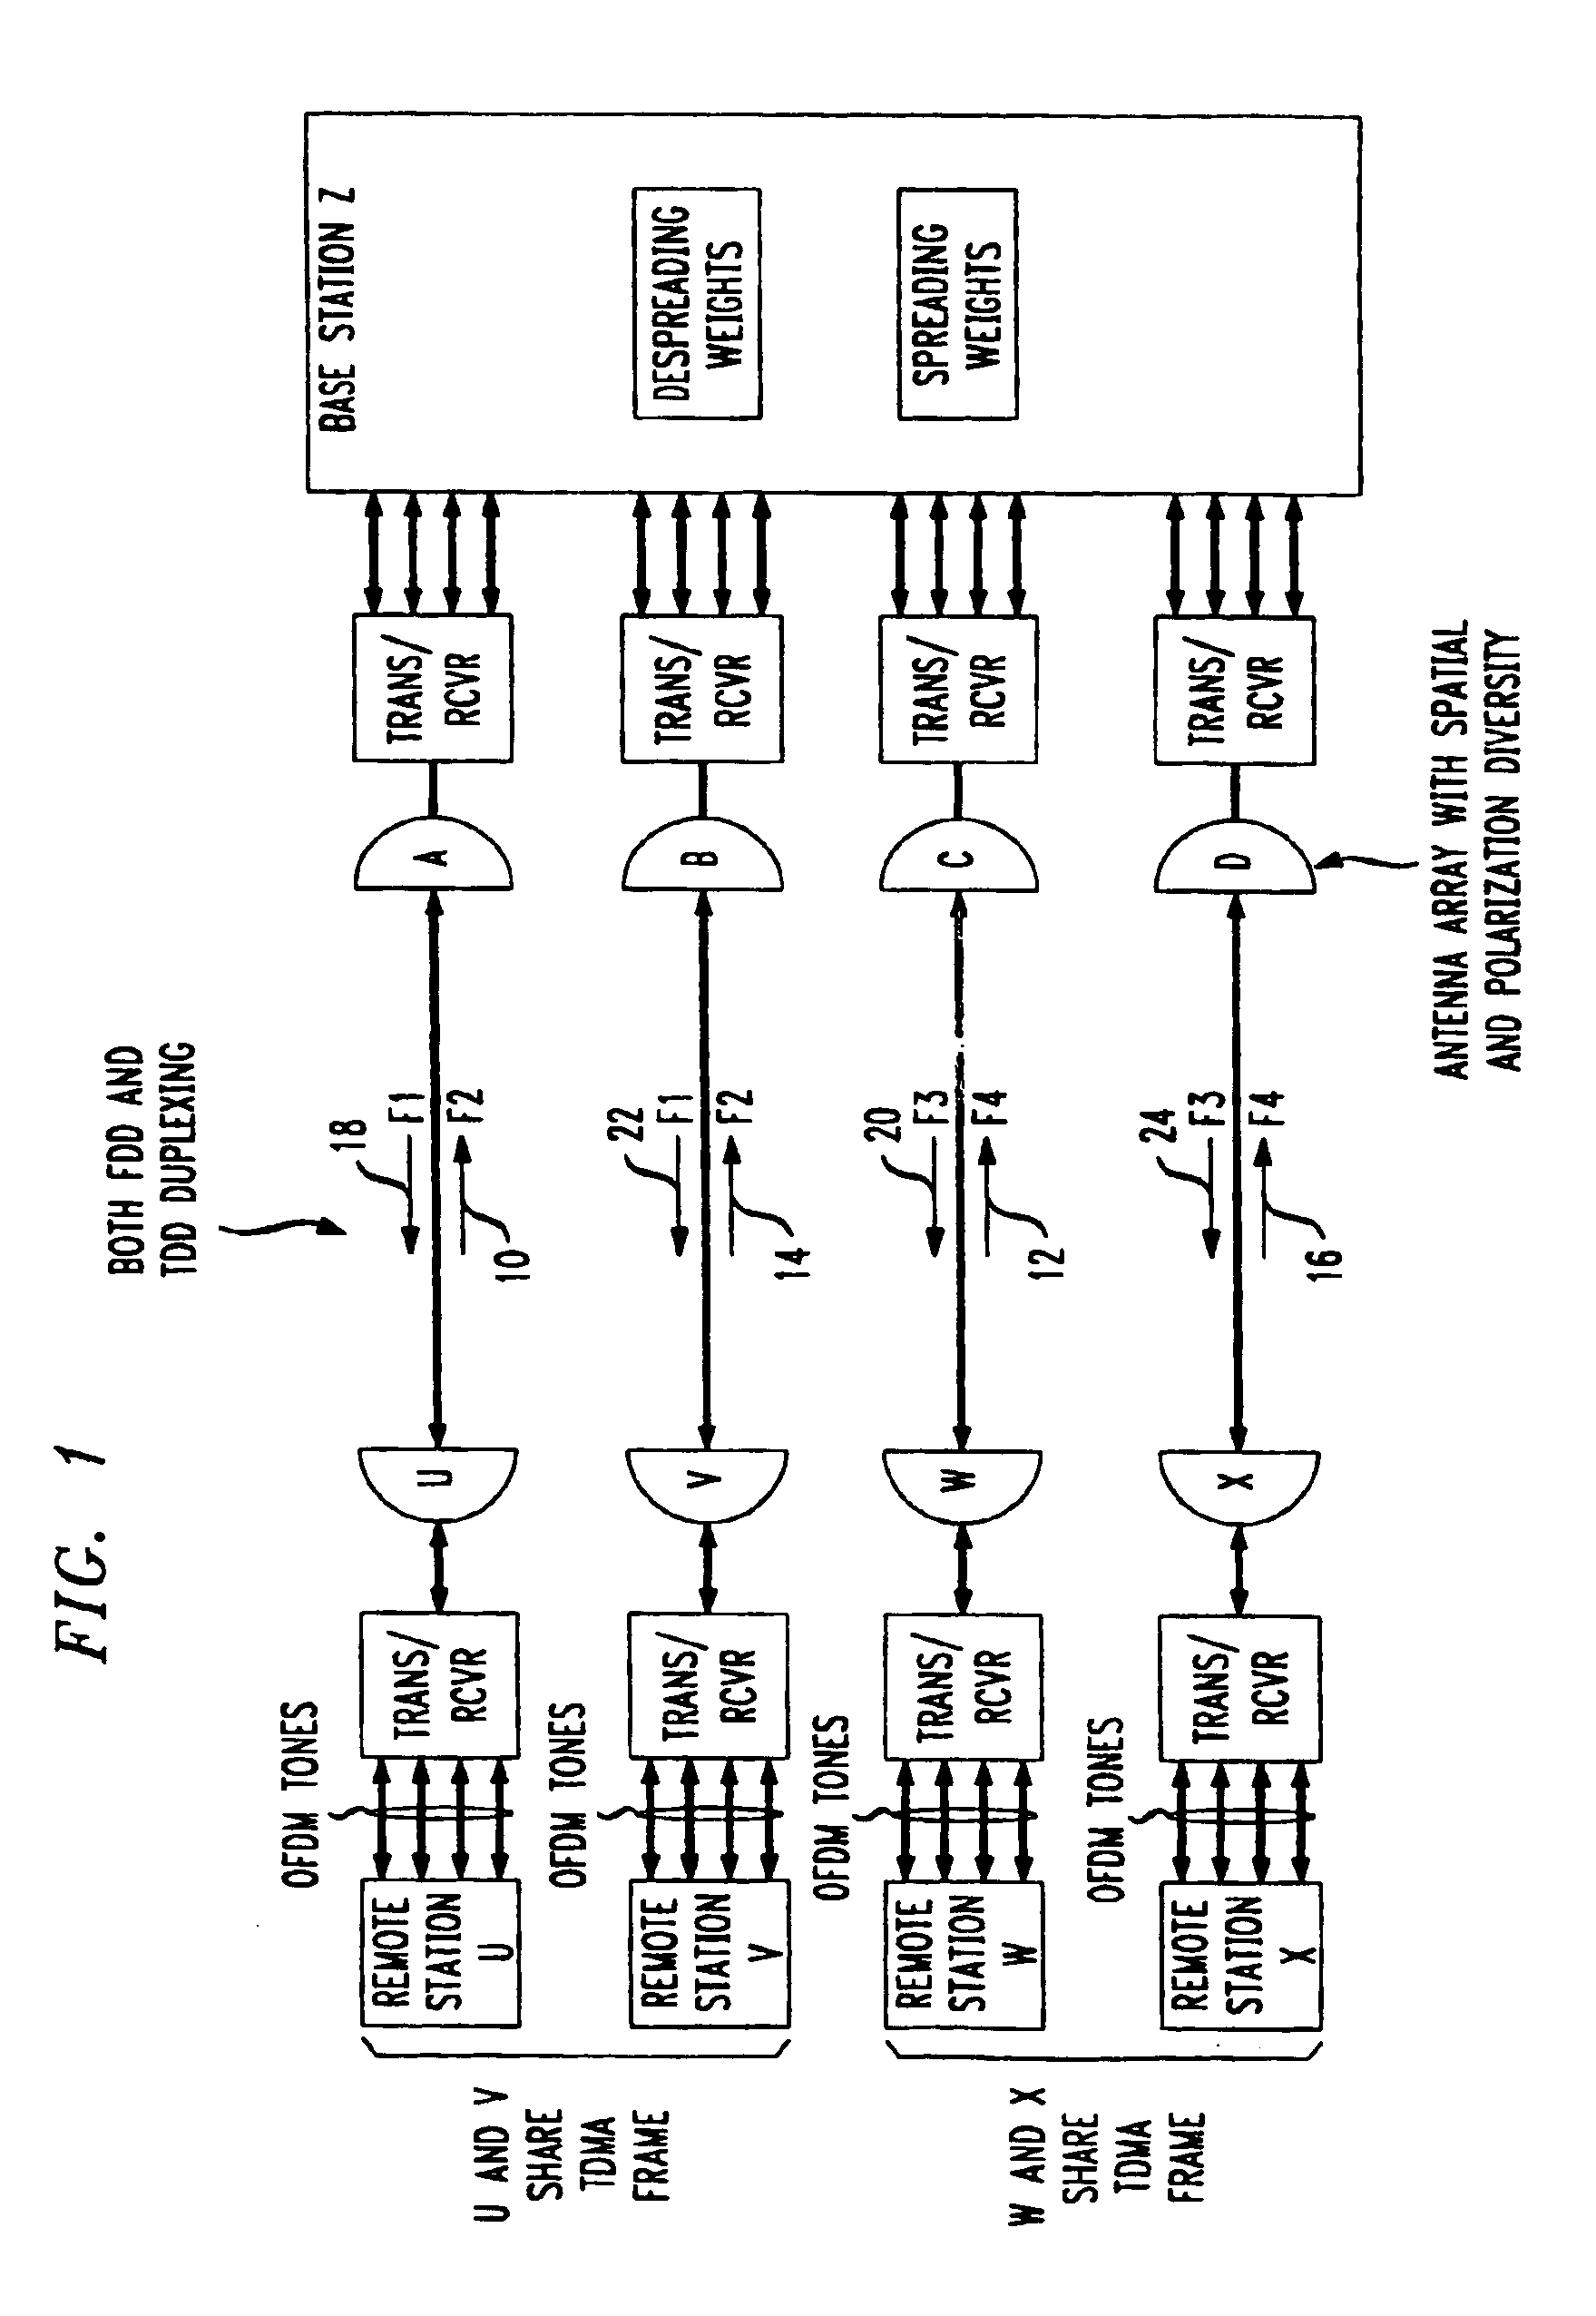 Method for frequency division duplex communications